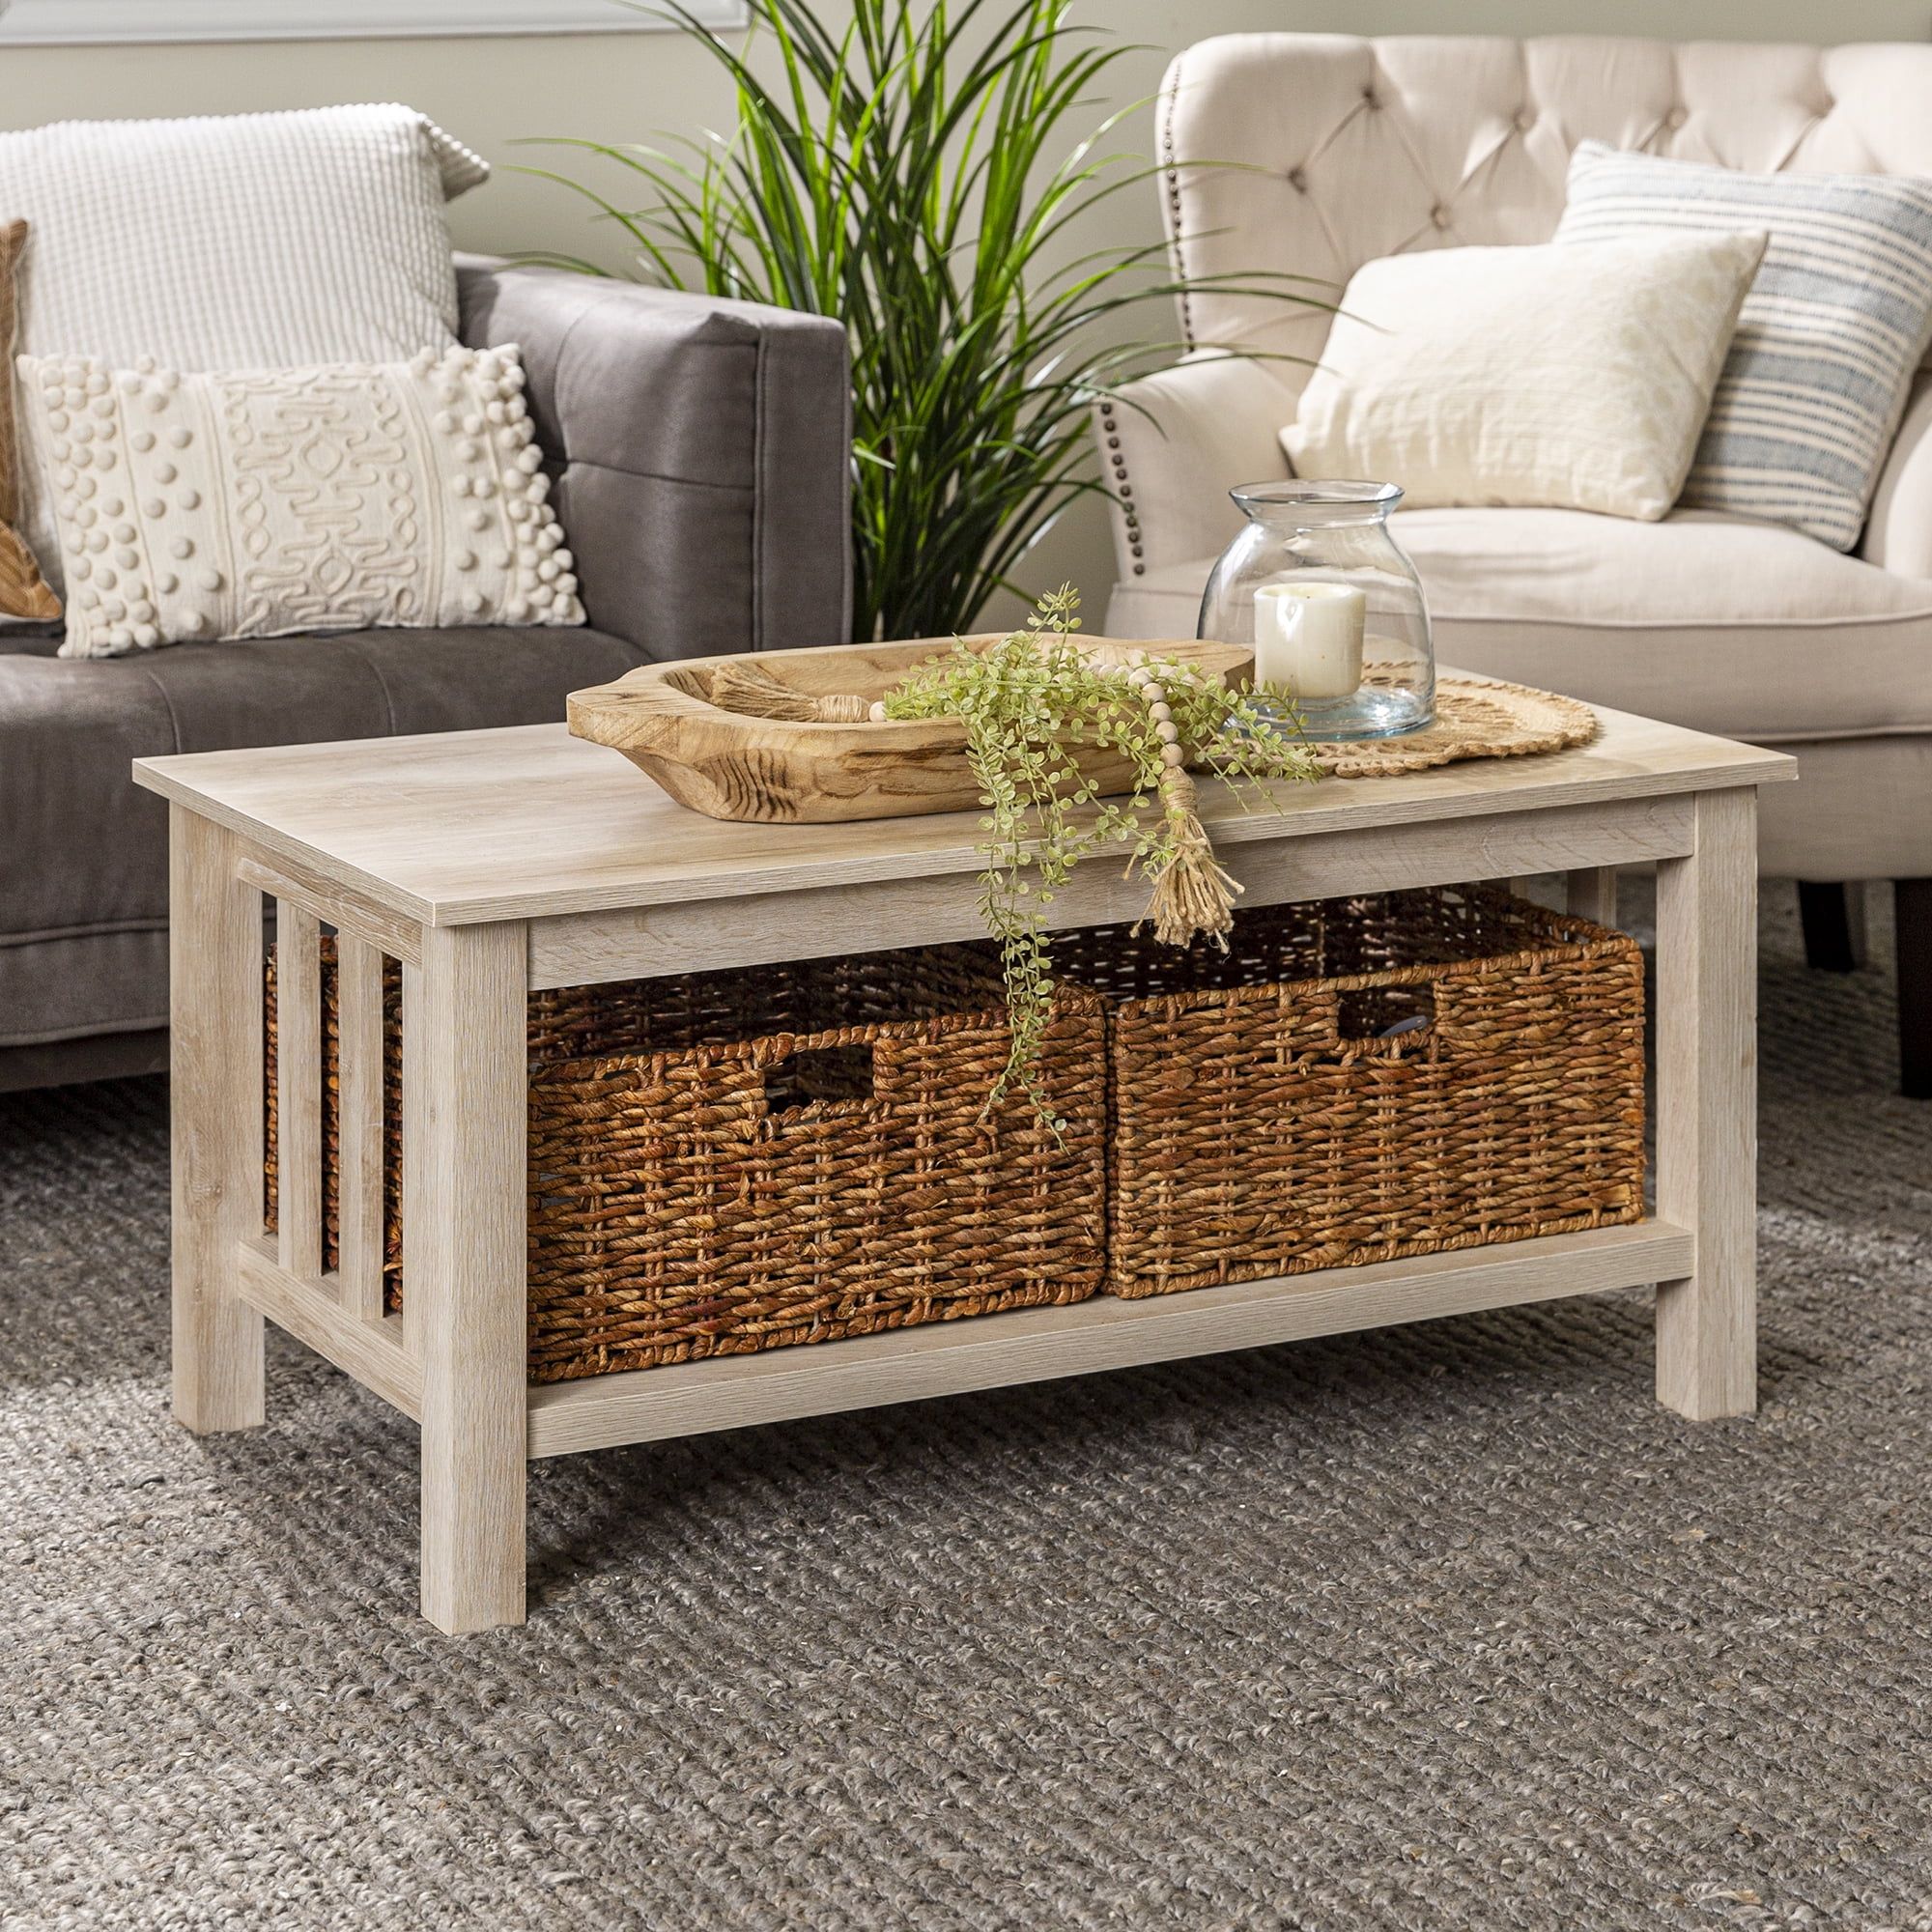 Woven Paths Traditional Storage Coffee Table With Bins, White Oak Intended For Woven Paths Coffee Tables (Photo 3 of 15)